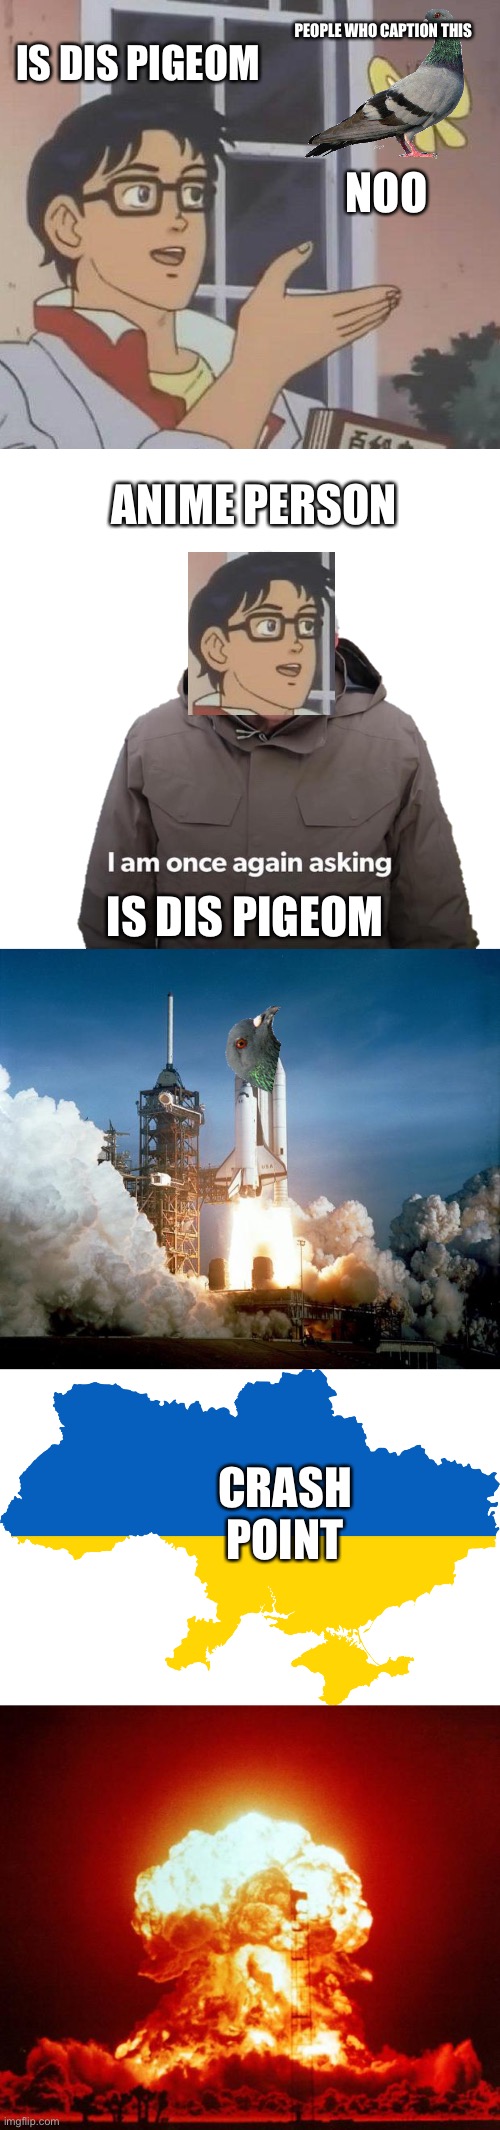 he go boom | IS DIS PIGEOM; PEOPLE WHO CAPTION THIS; NOO; ANIME PERSON; IS DIS PIGEOM; CRASH POINT | image tagged in memes,is this a pigeon,bernie i am once again asking sticker,rocket launch,outline of ukraine,nuke | made w/ Imgflip meme maker